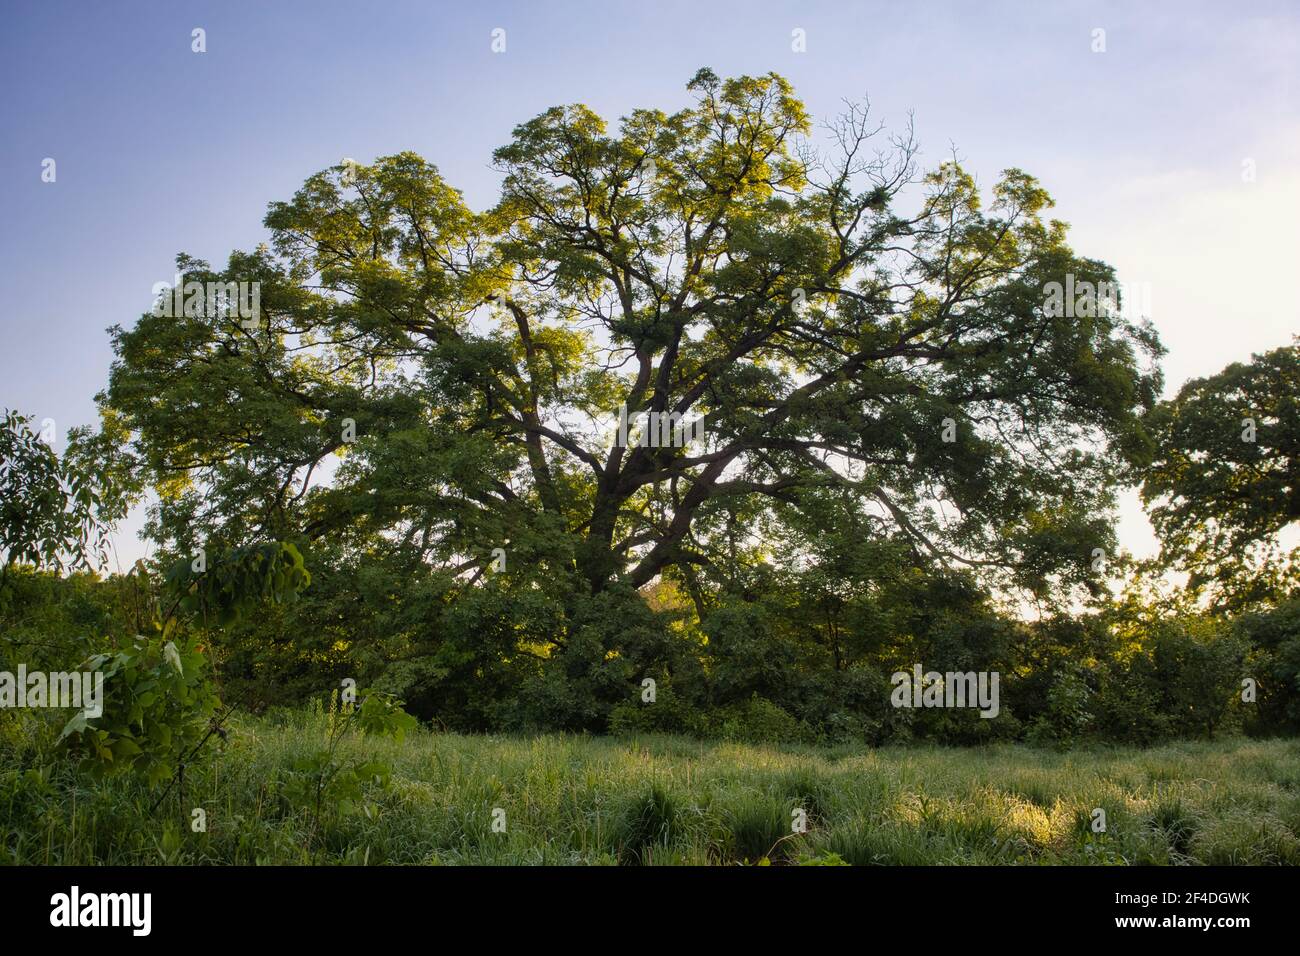 One oak tree in summer with green leaves and grass. Series of four seasons. Stock Photo